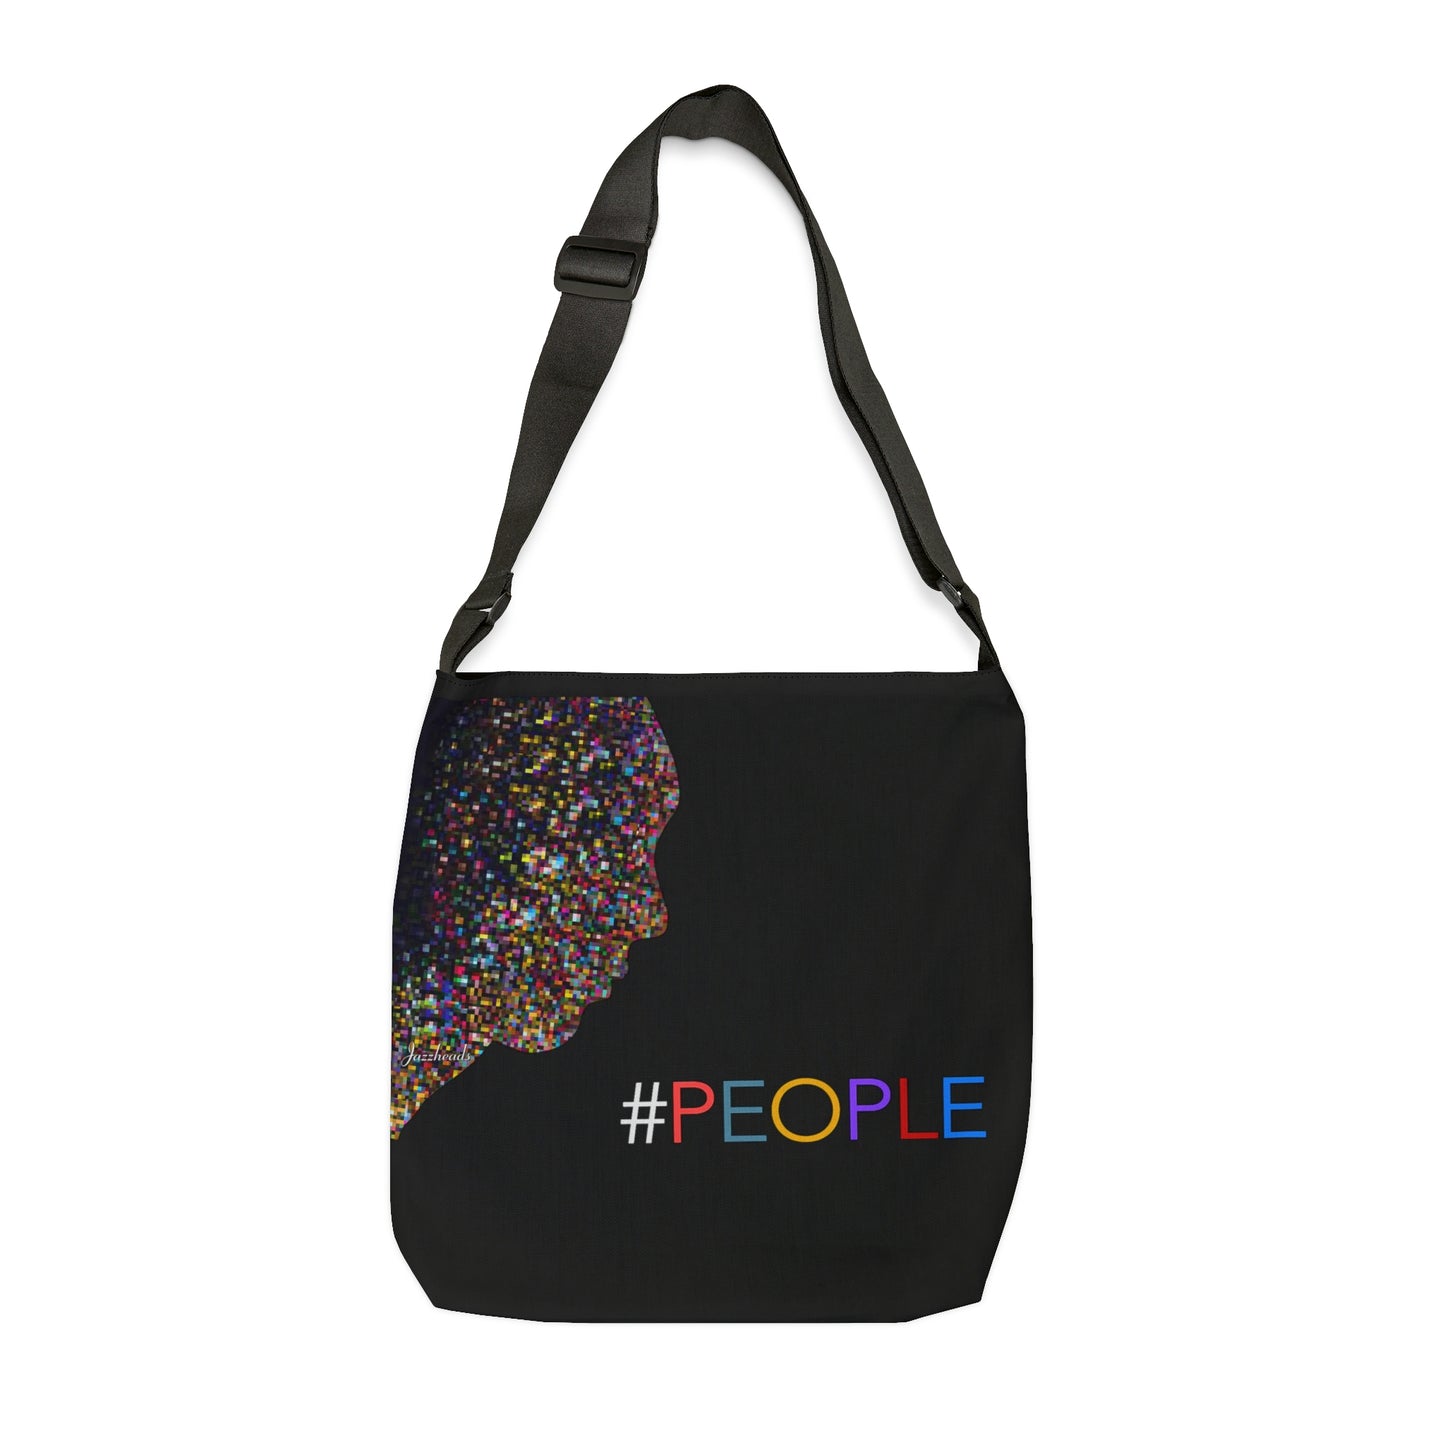 #PEOPLE - Coolest Tote Ever!